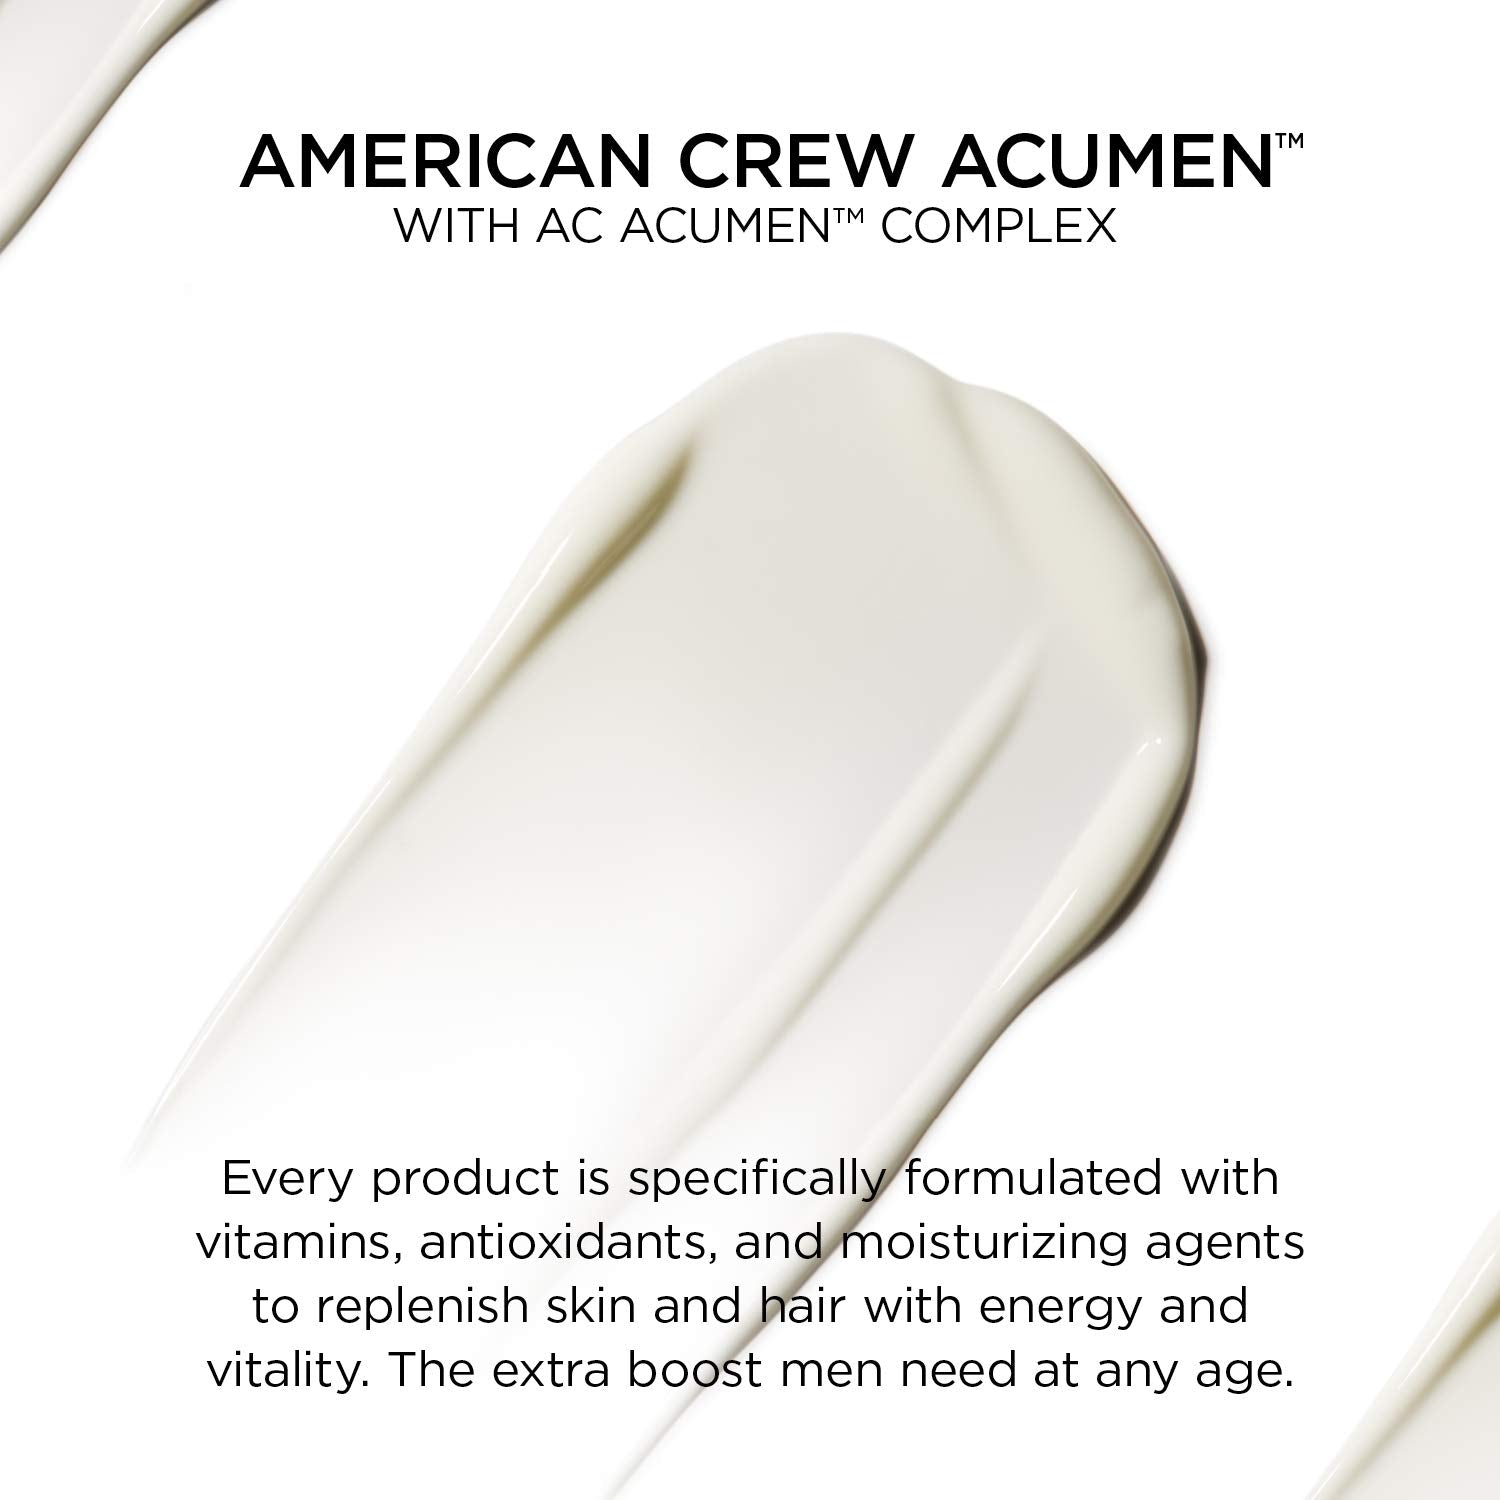 American Crew Men's Body Lotion, Daily Moisturizer, Hydrating & Reviving Cream, 60 mL : Beauty & Personal Care